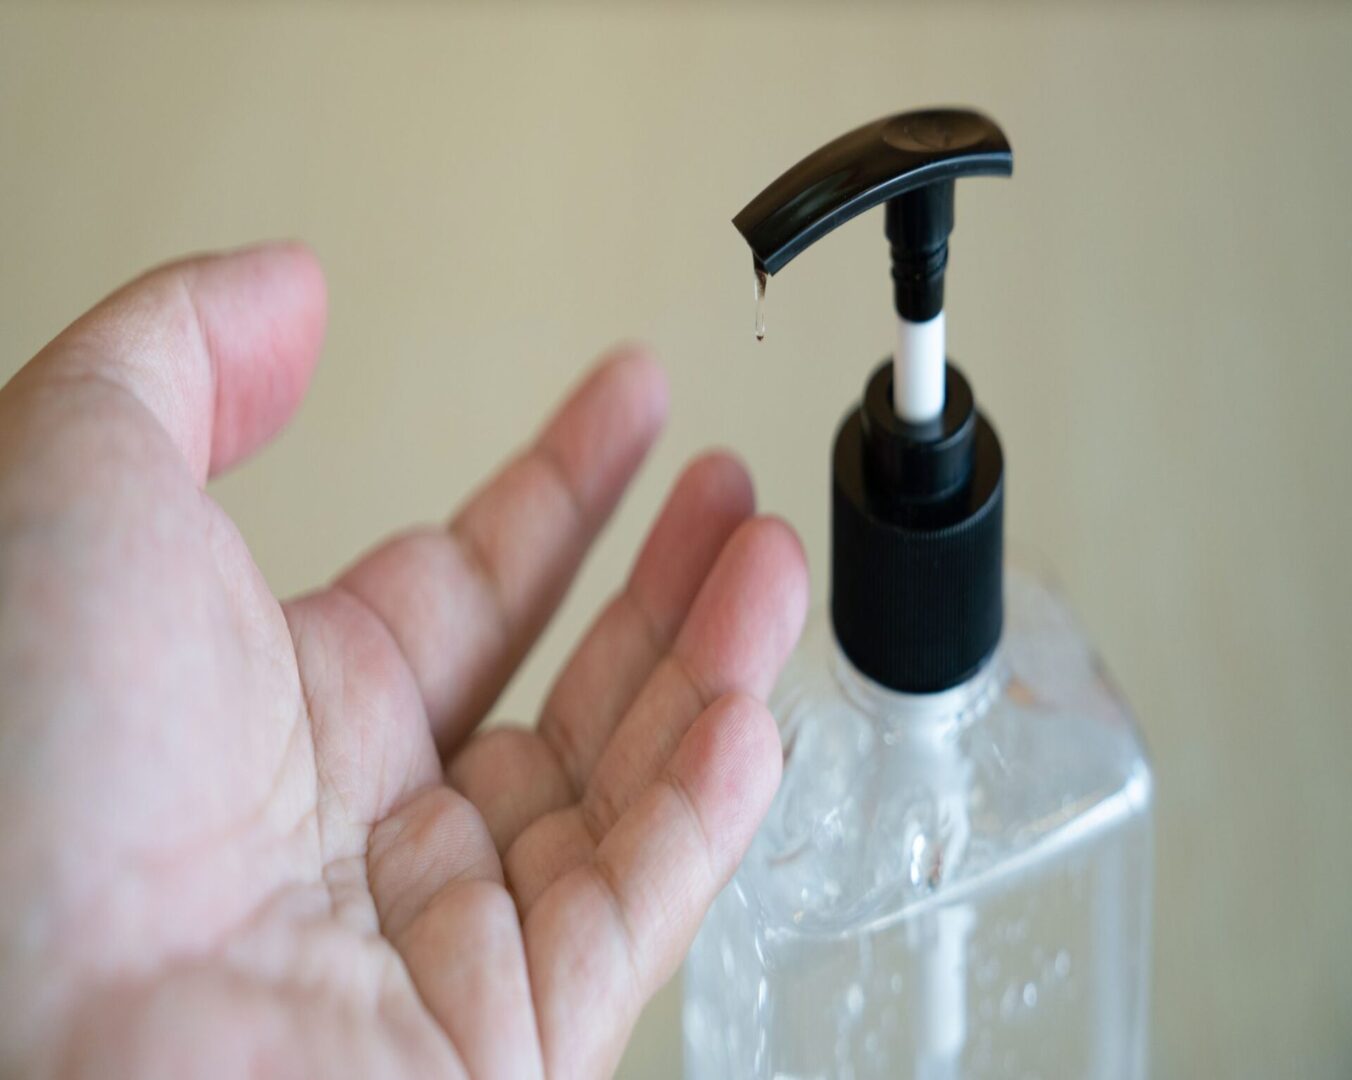 How to Dispose of Hand Sanitizer?